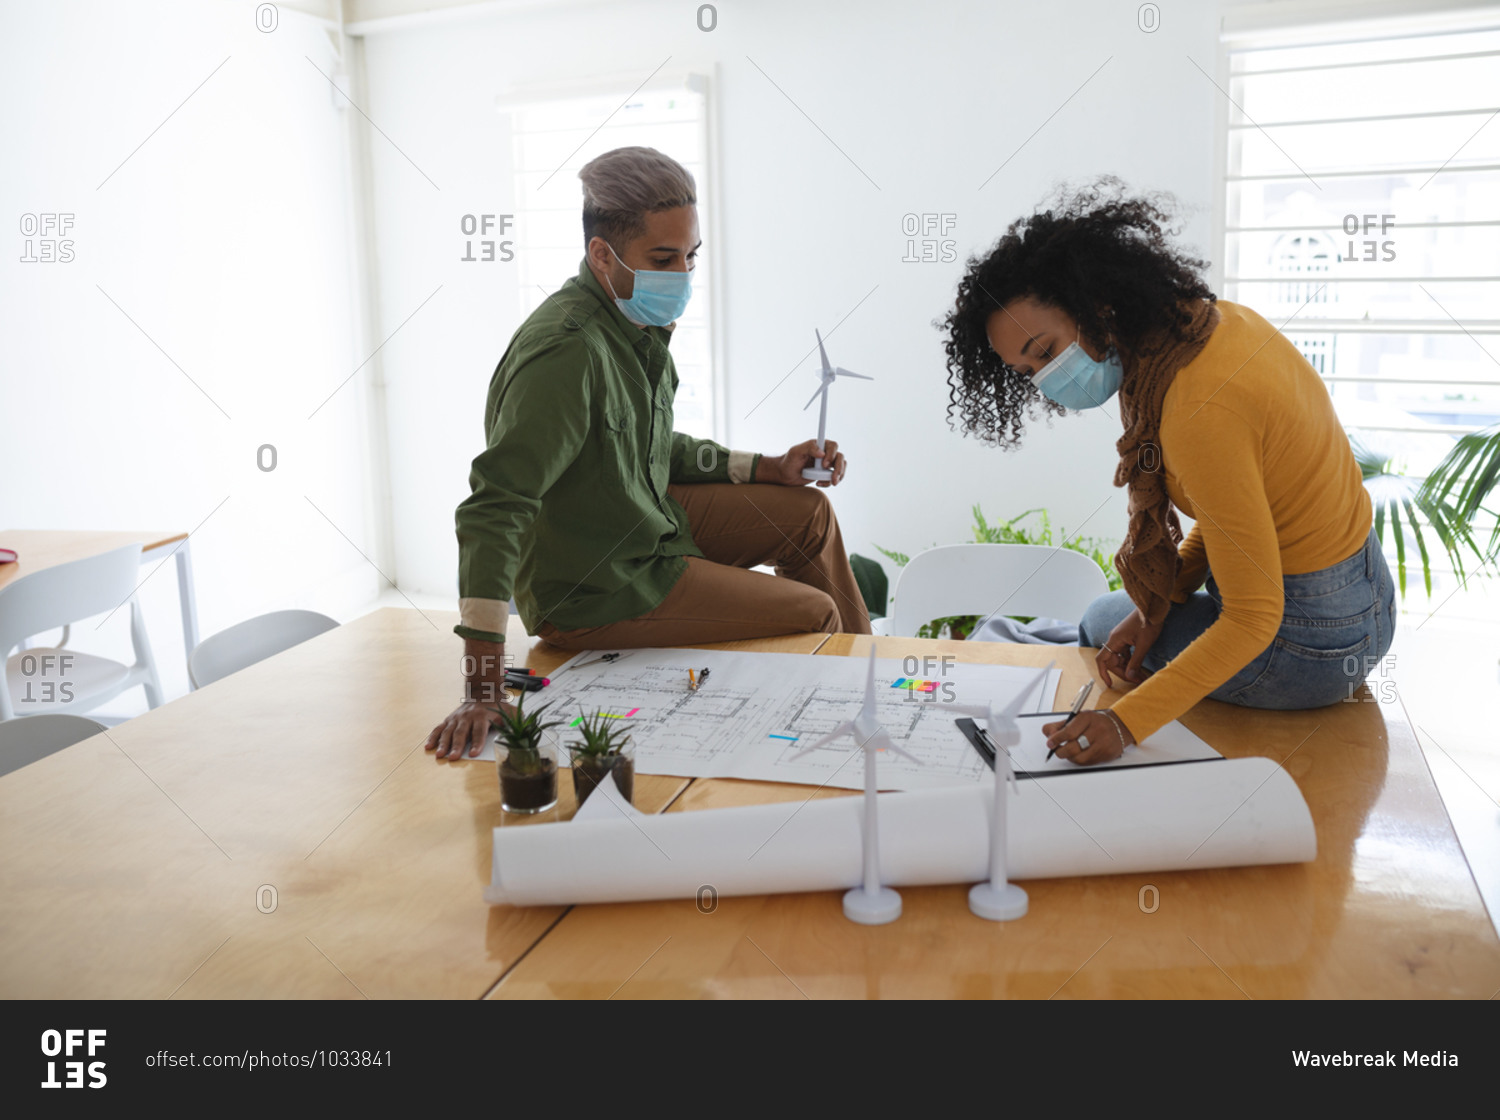 Mixed race male and female architects in office wearing face masks, discussing over architectural drawing. Health and hygiene in workplace during Coronavirus Covid 19 pandemic.